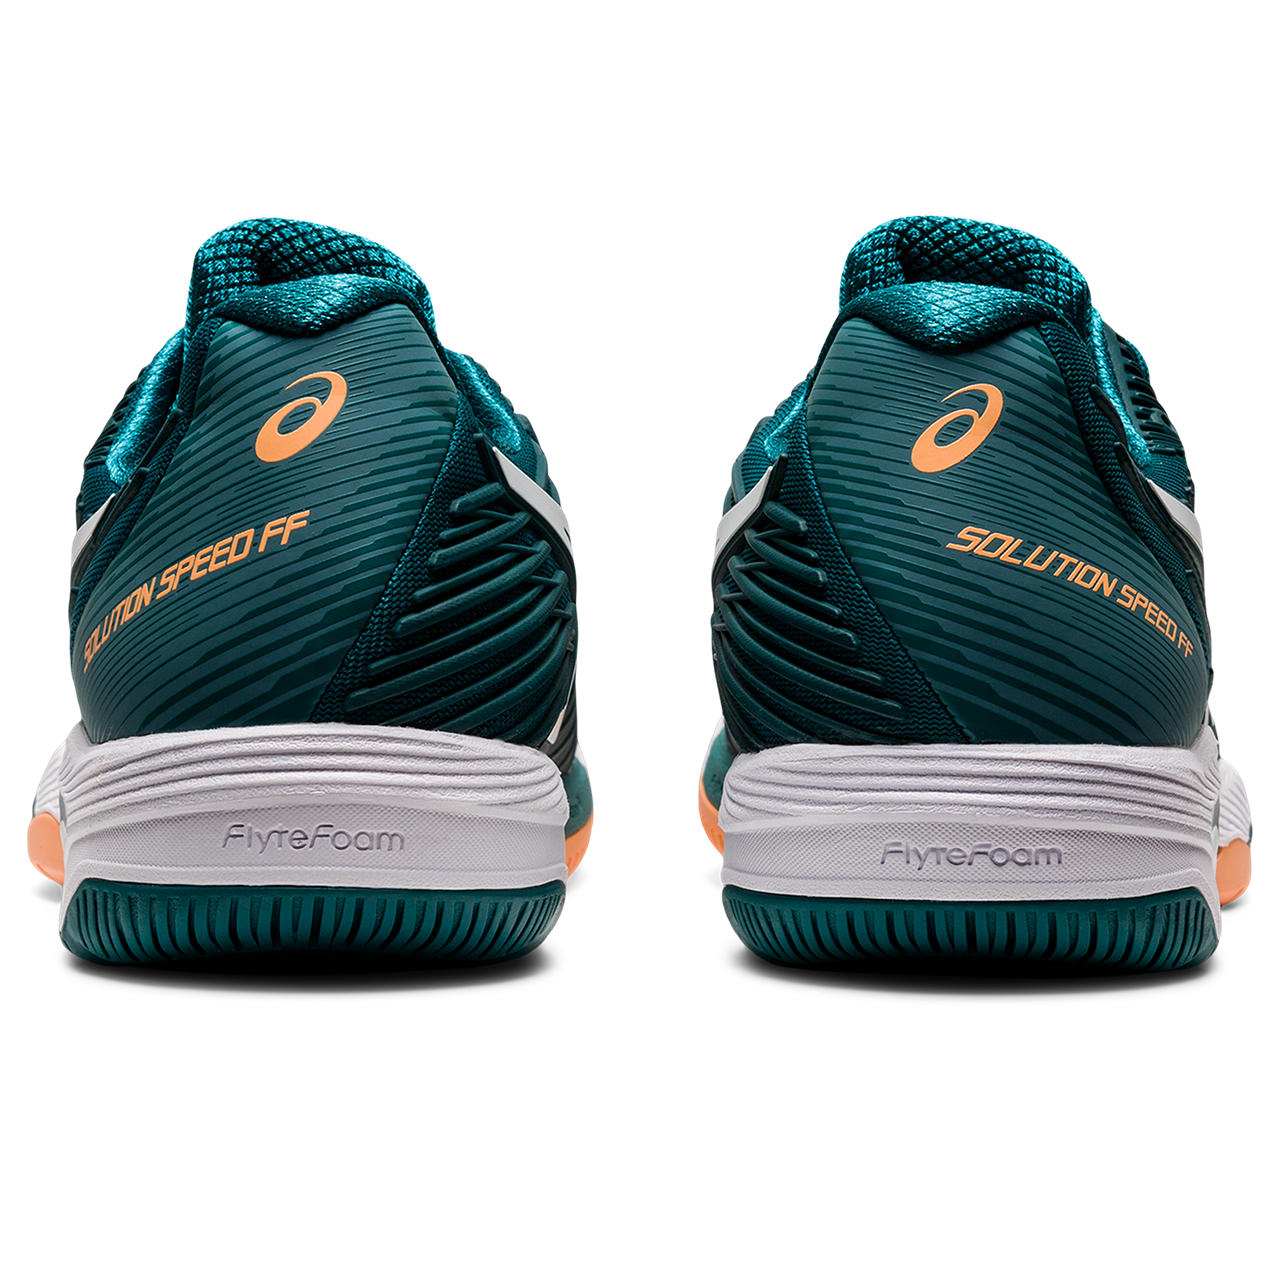 Back view of the Men's Solution Speed FF 2 tennis shoe by ASIC in the color Velvet Pine/White